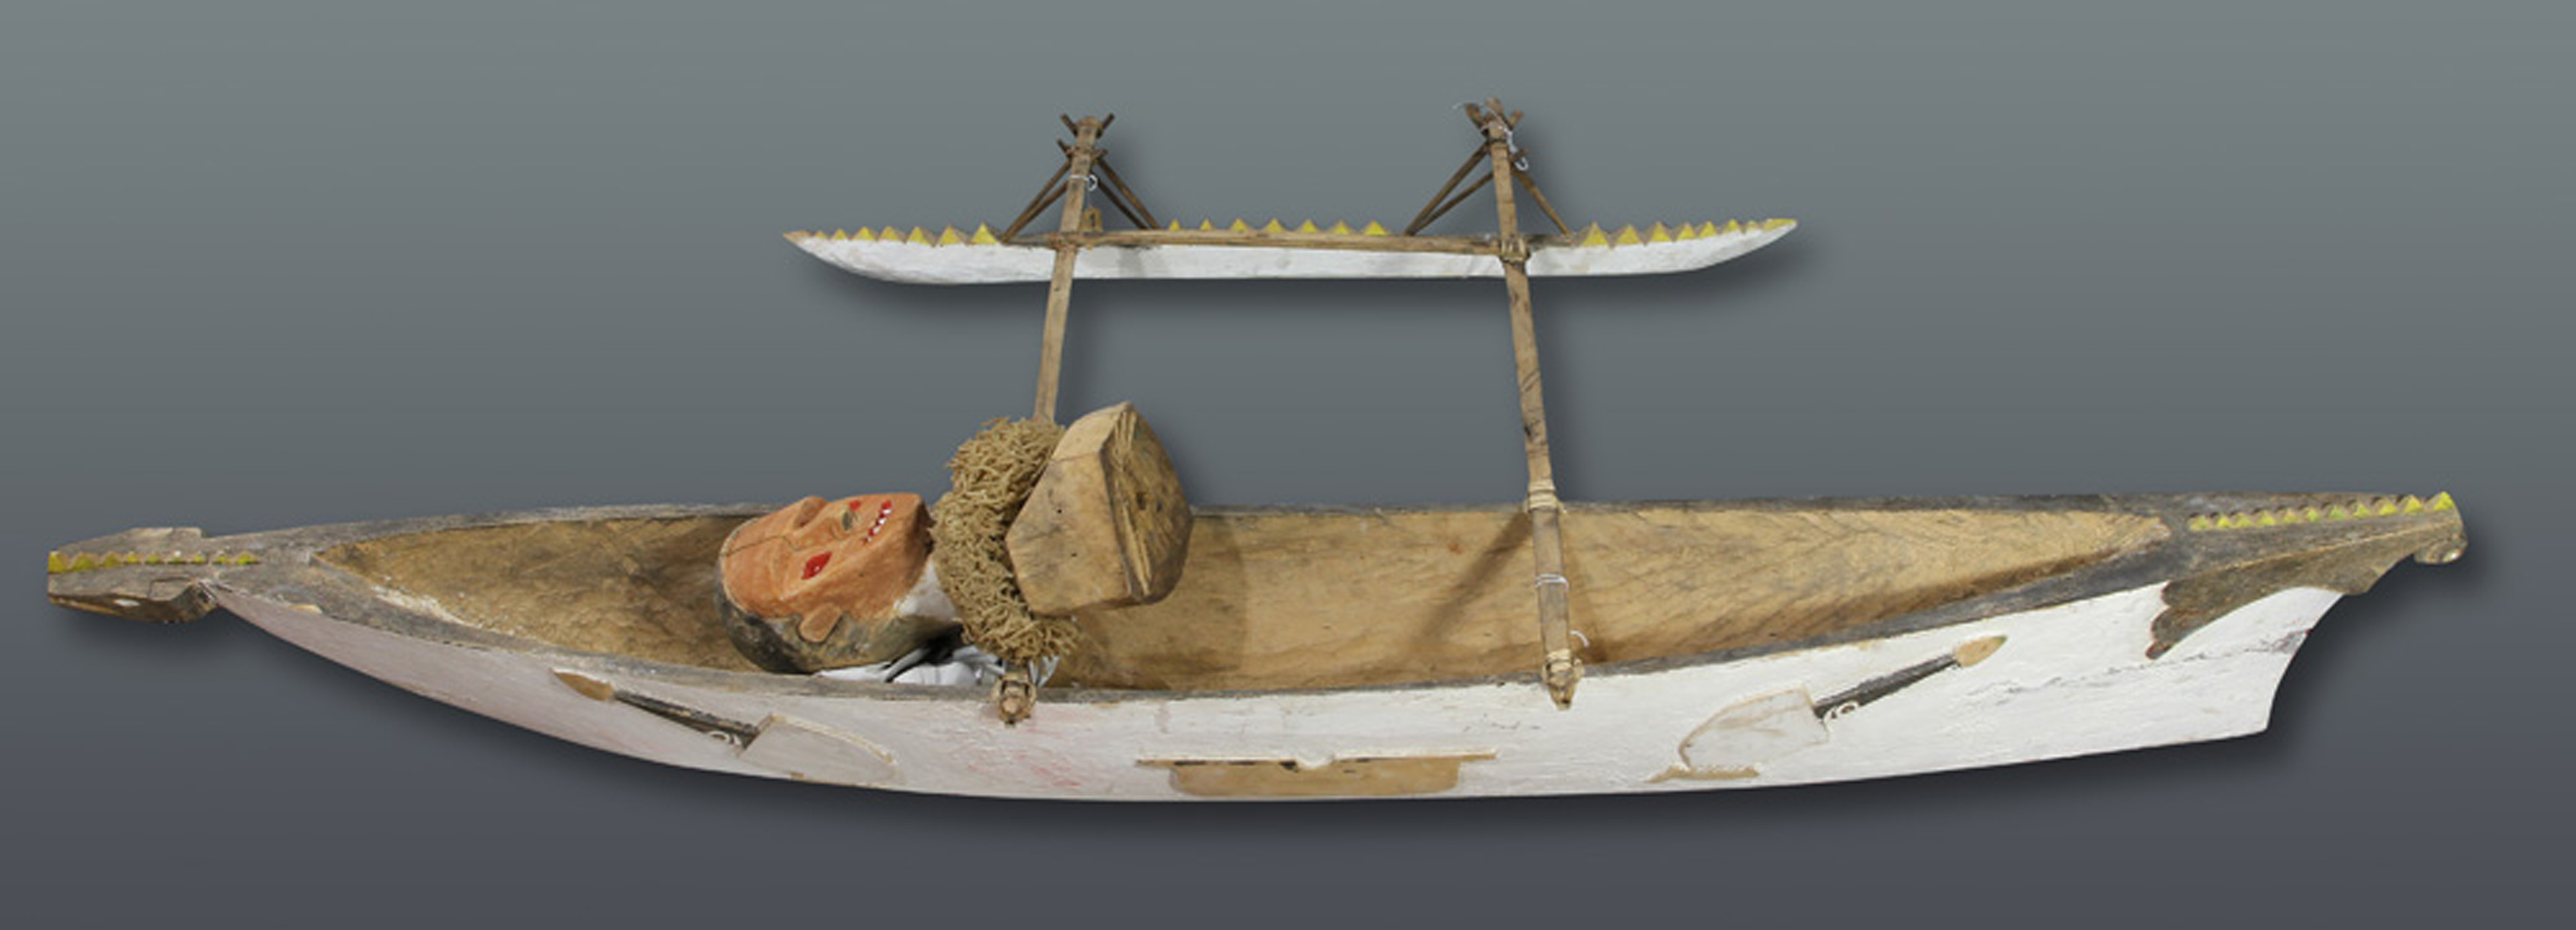 A MODEL OUTRIGGER CANOE USED FOR 3a4f7e